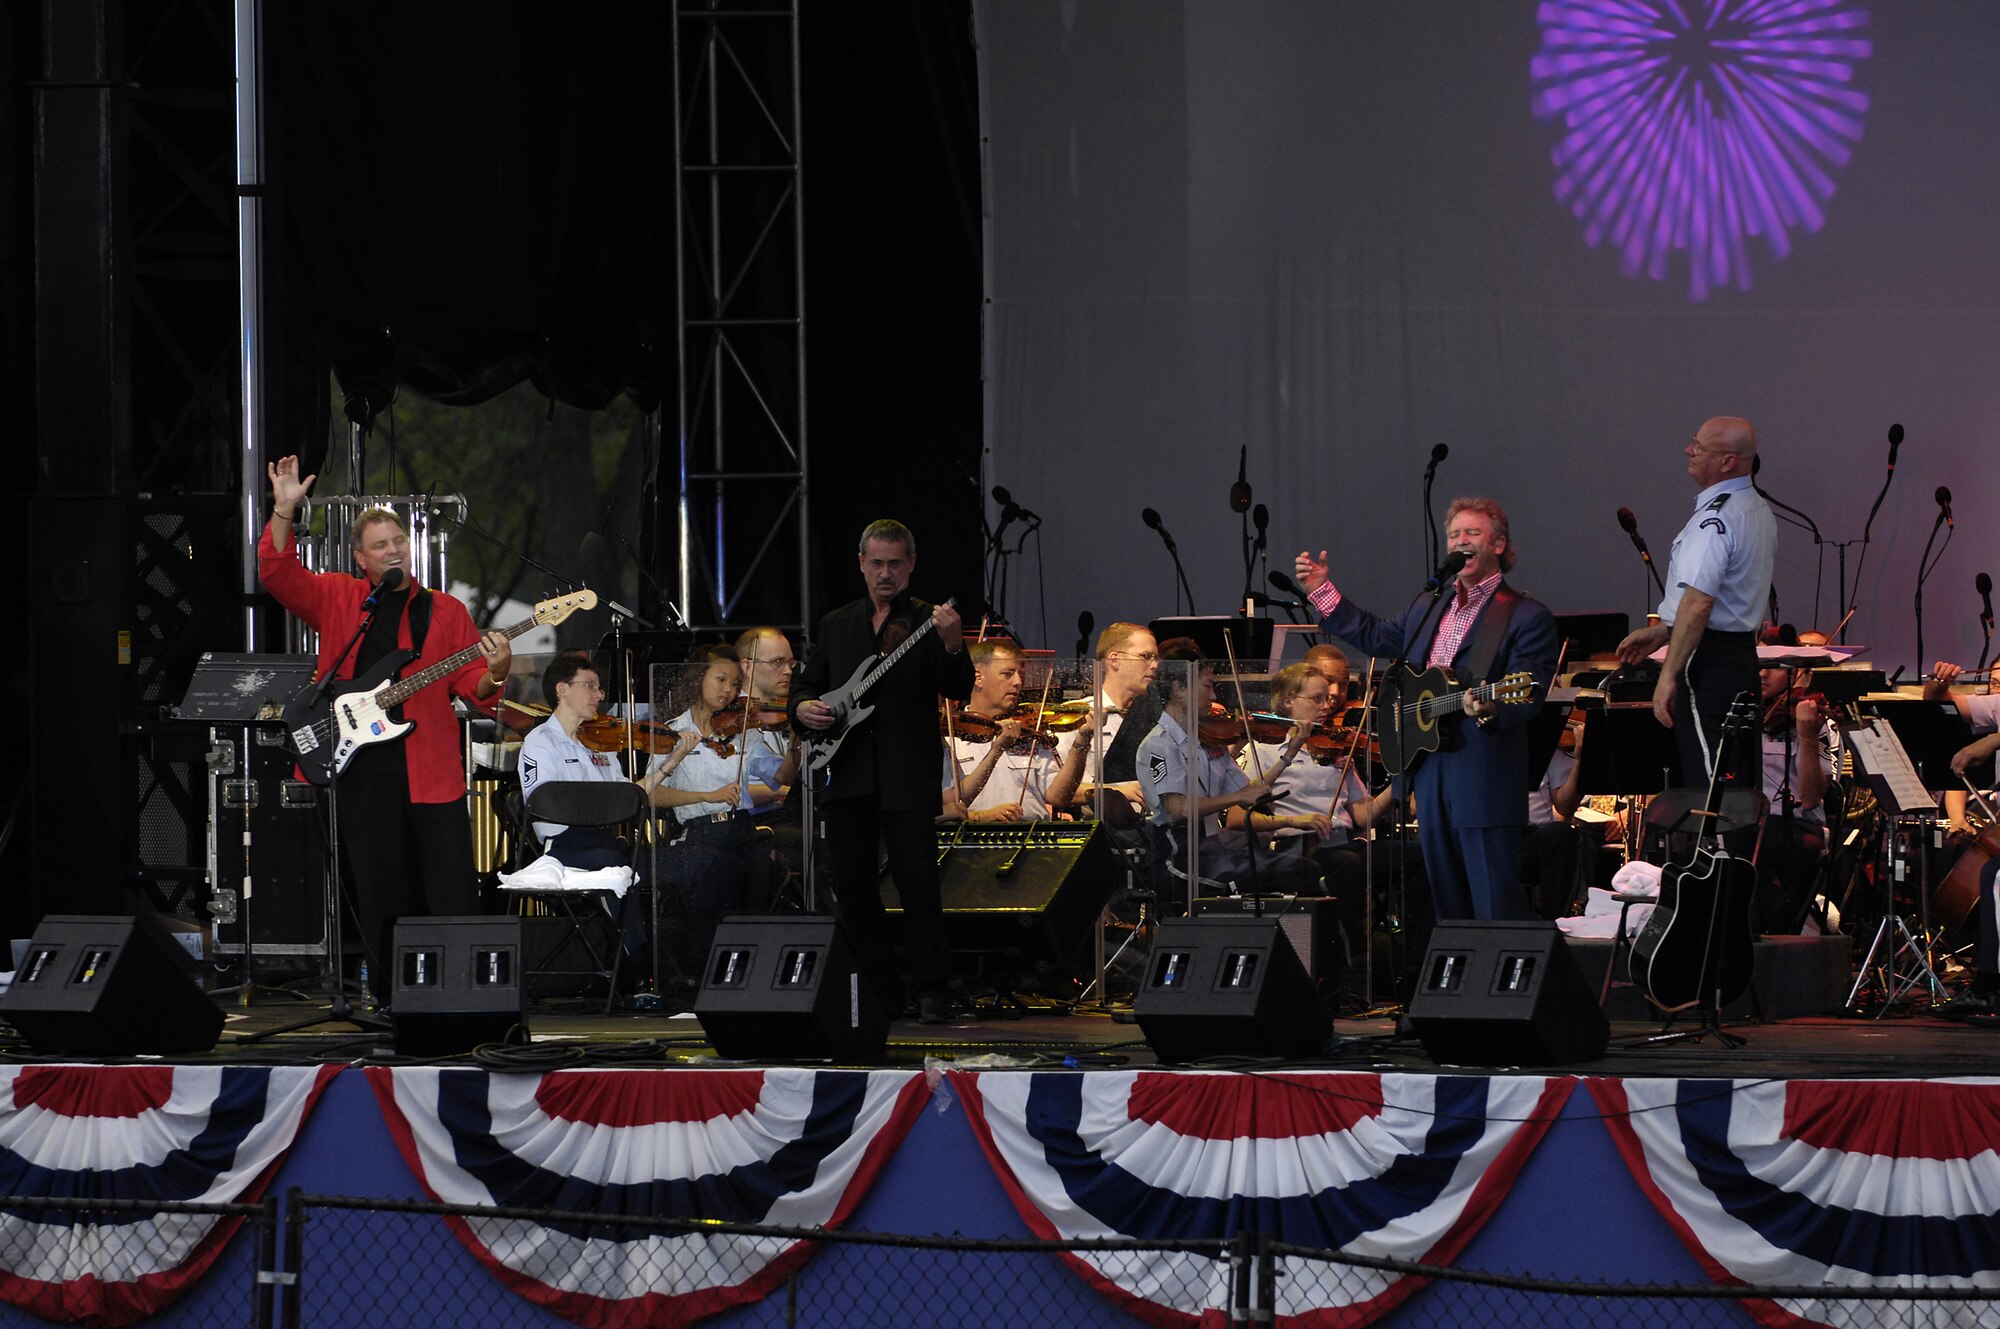 Larry Gatlin and the Gatlin Brothers perform on stage with the U.S. Air Force Band July 4 at the Washington Monument.  The Band presents a special concert open to the public at the base of the Washington Monument as part of the National Park Service's Independence Day Celebration. The program included the Concert Band, the Singing Sergeants, Max Impact and a special appearance by the Grammy Award-winning country artists Larry Gatlin and the Gatlin Brothers. (U.S. Air Force photo by Senior Airman Marleah Miller)